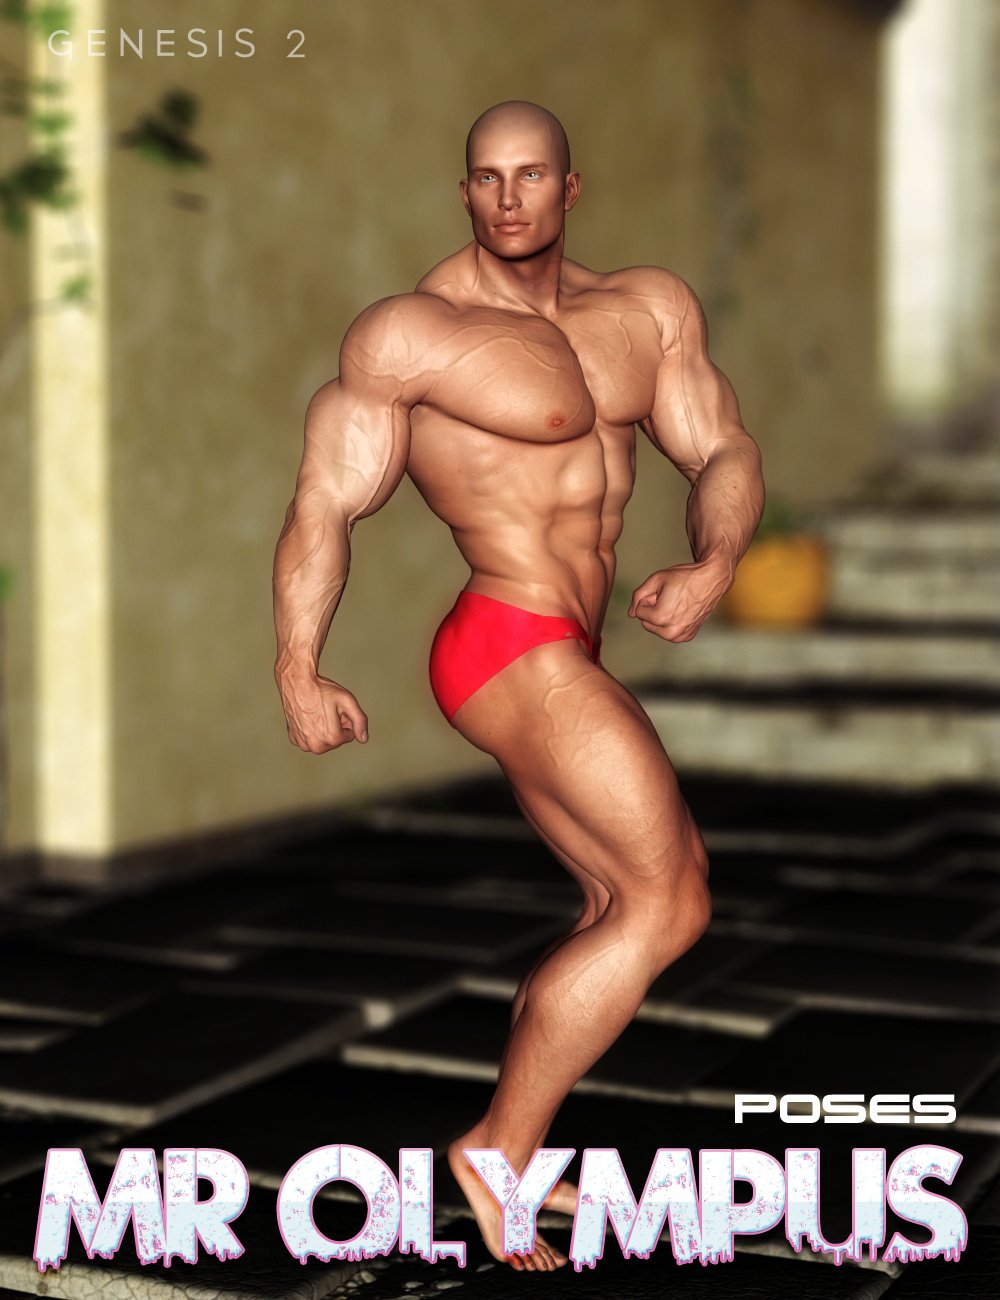 Mr Olympus Poses for Genesis 2 Male(s) by: Muscleman, 3D Models by Daz 3D